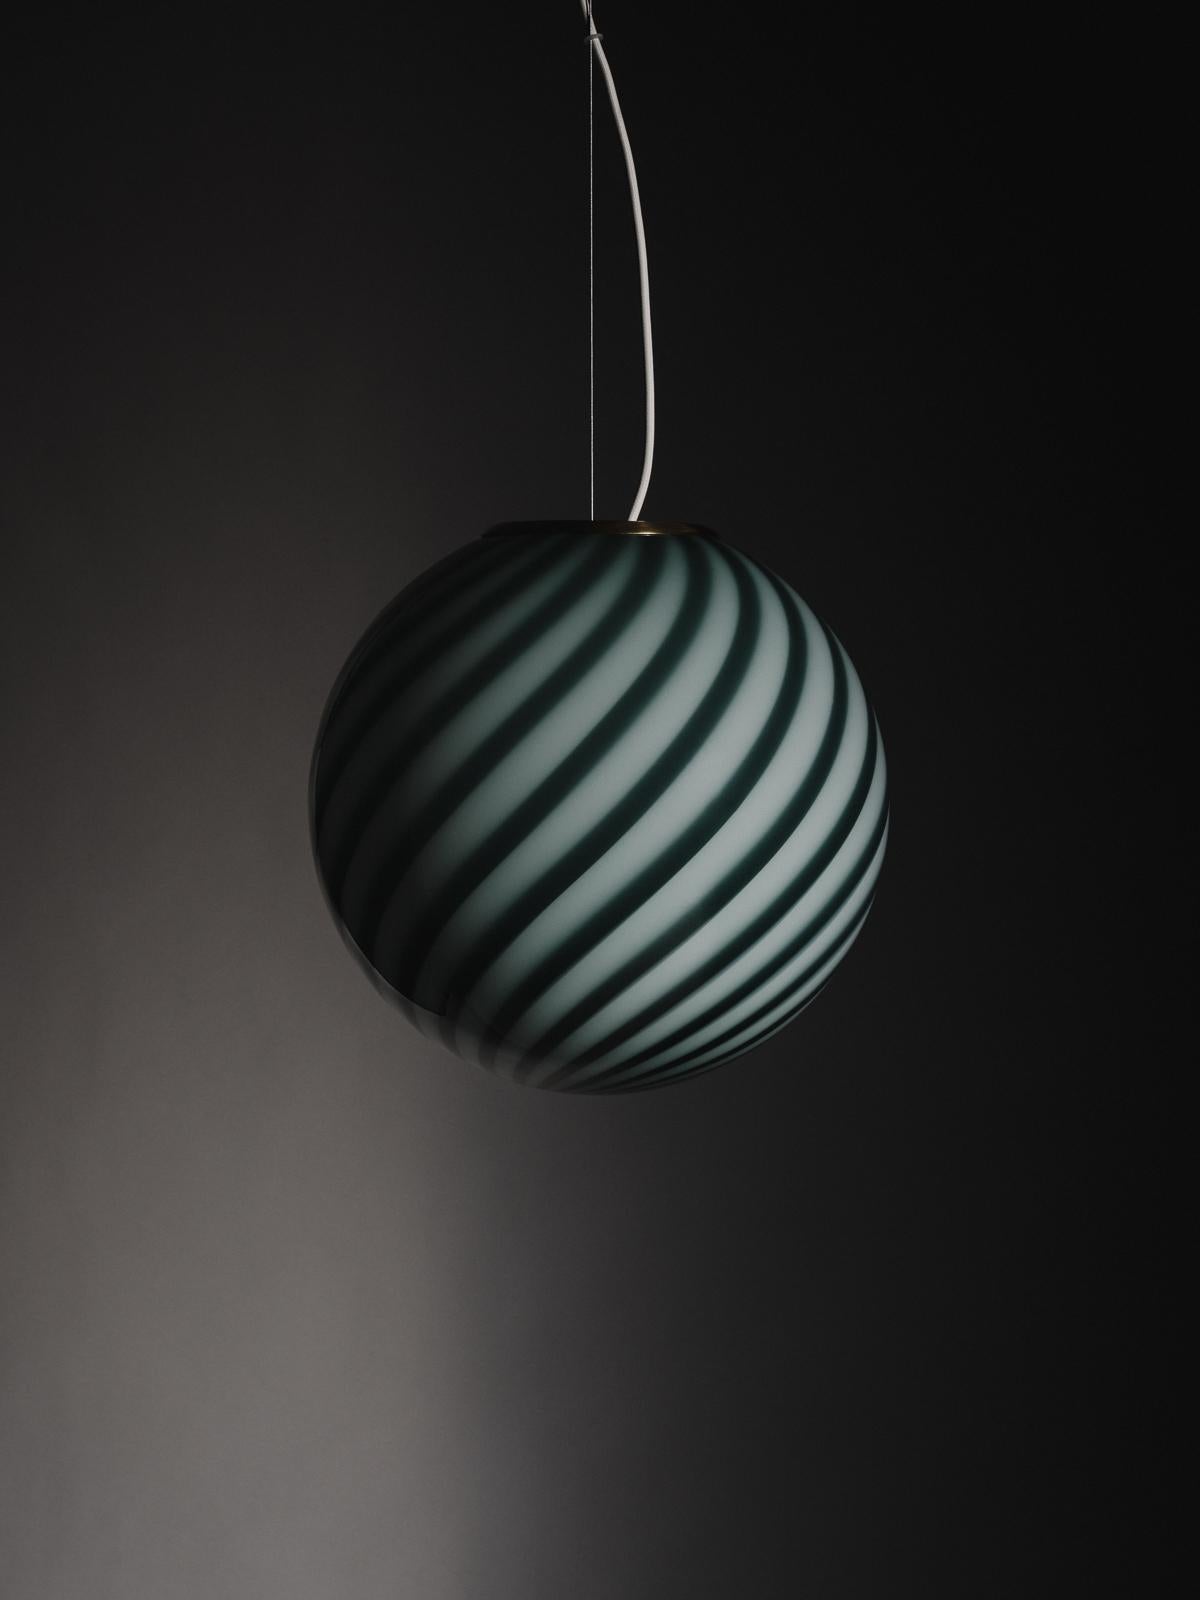 A limited edition of 50, this sculptural sphere-shaped pendant ceiling lamp is crafted from mouth-blown opaline glass in Petrolio: a deep and rich shade of green. The lamp features an original swirl pattern obtained using a 1970s mould that gives